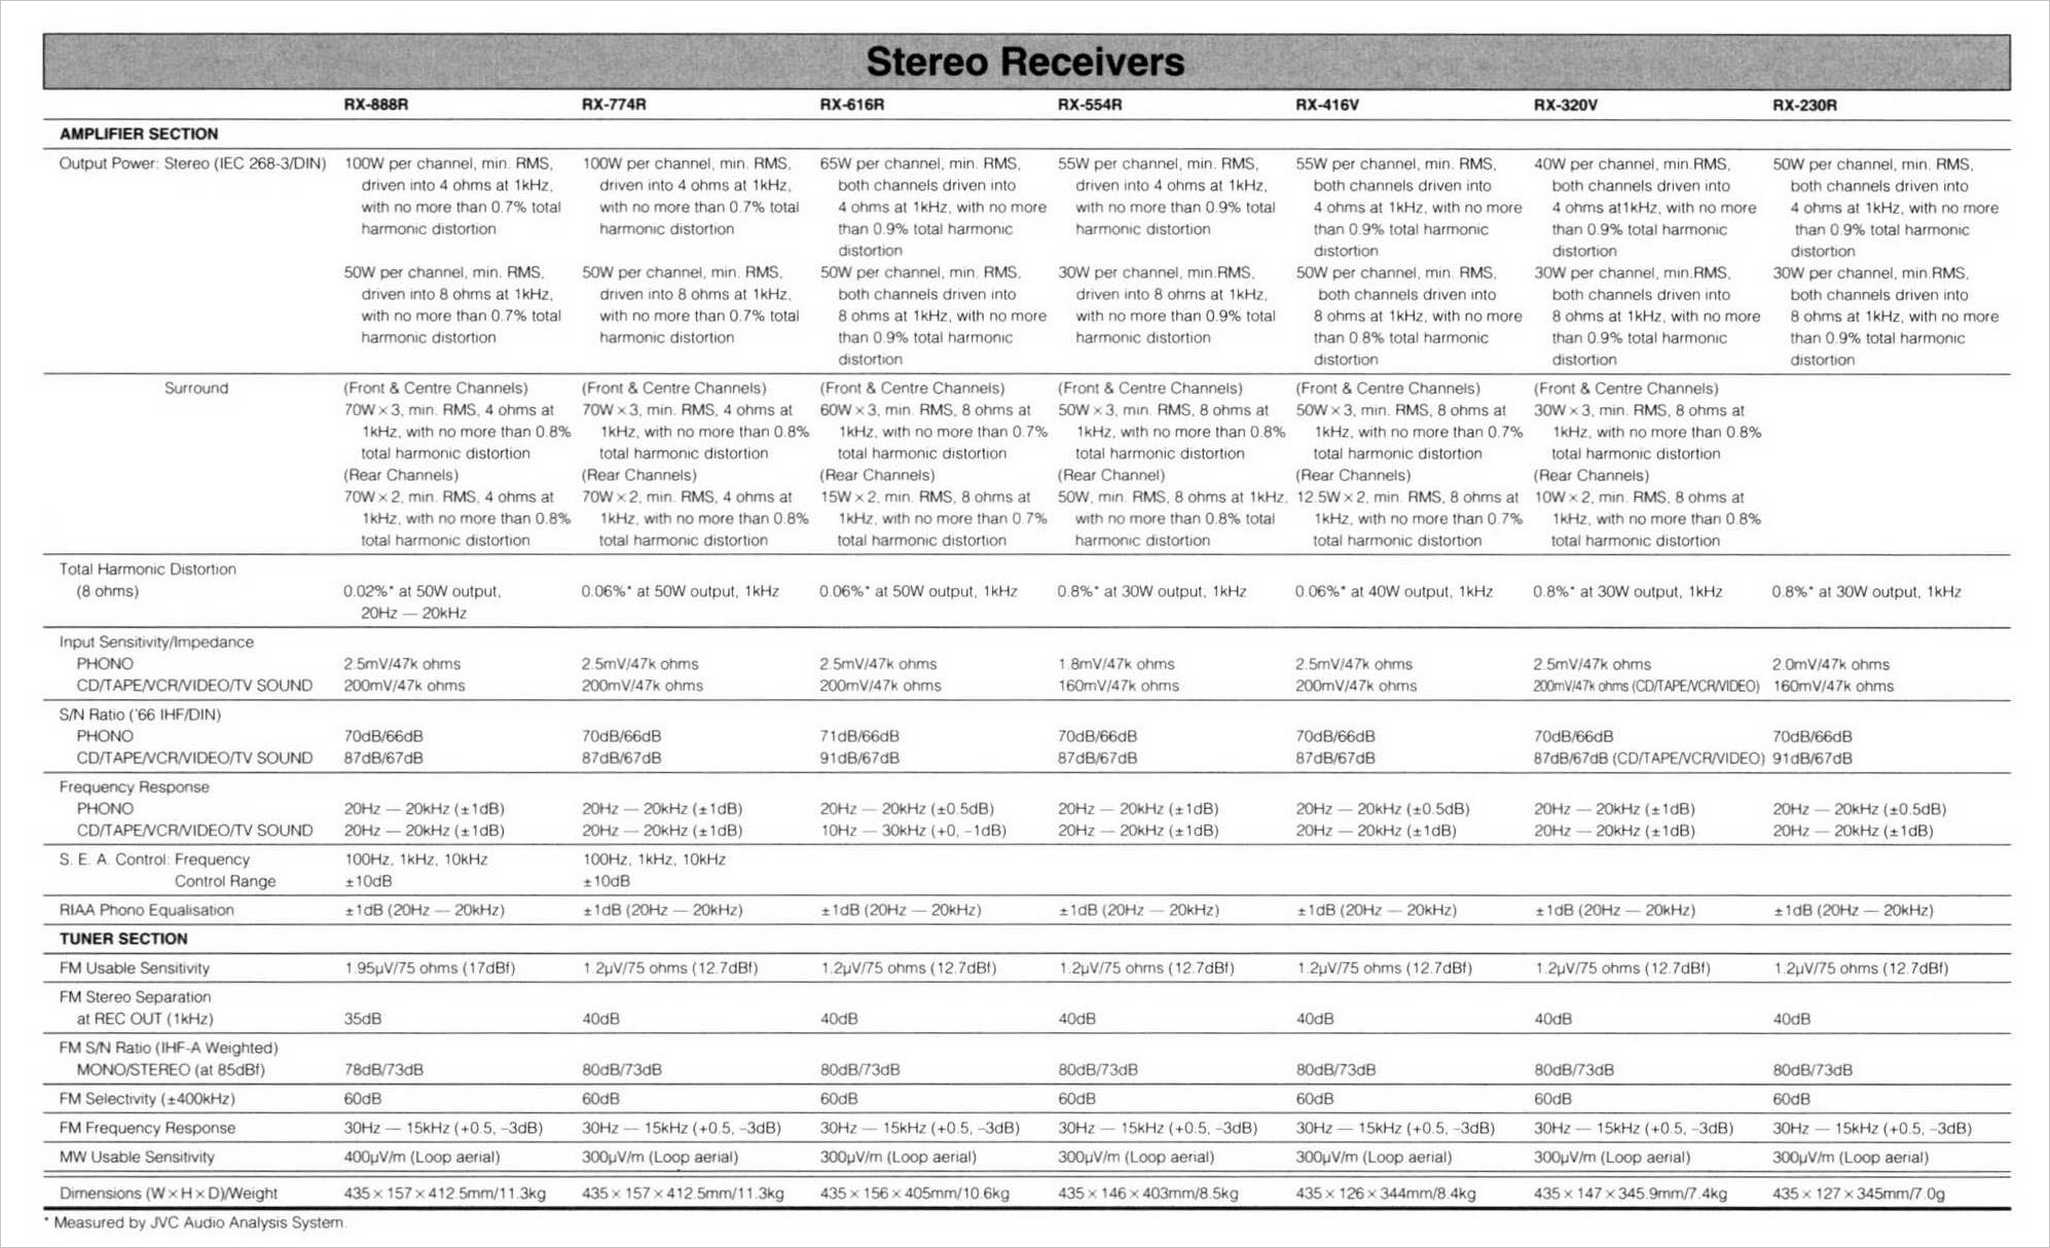 STEREO RECEIVERS SPECS